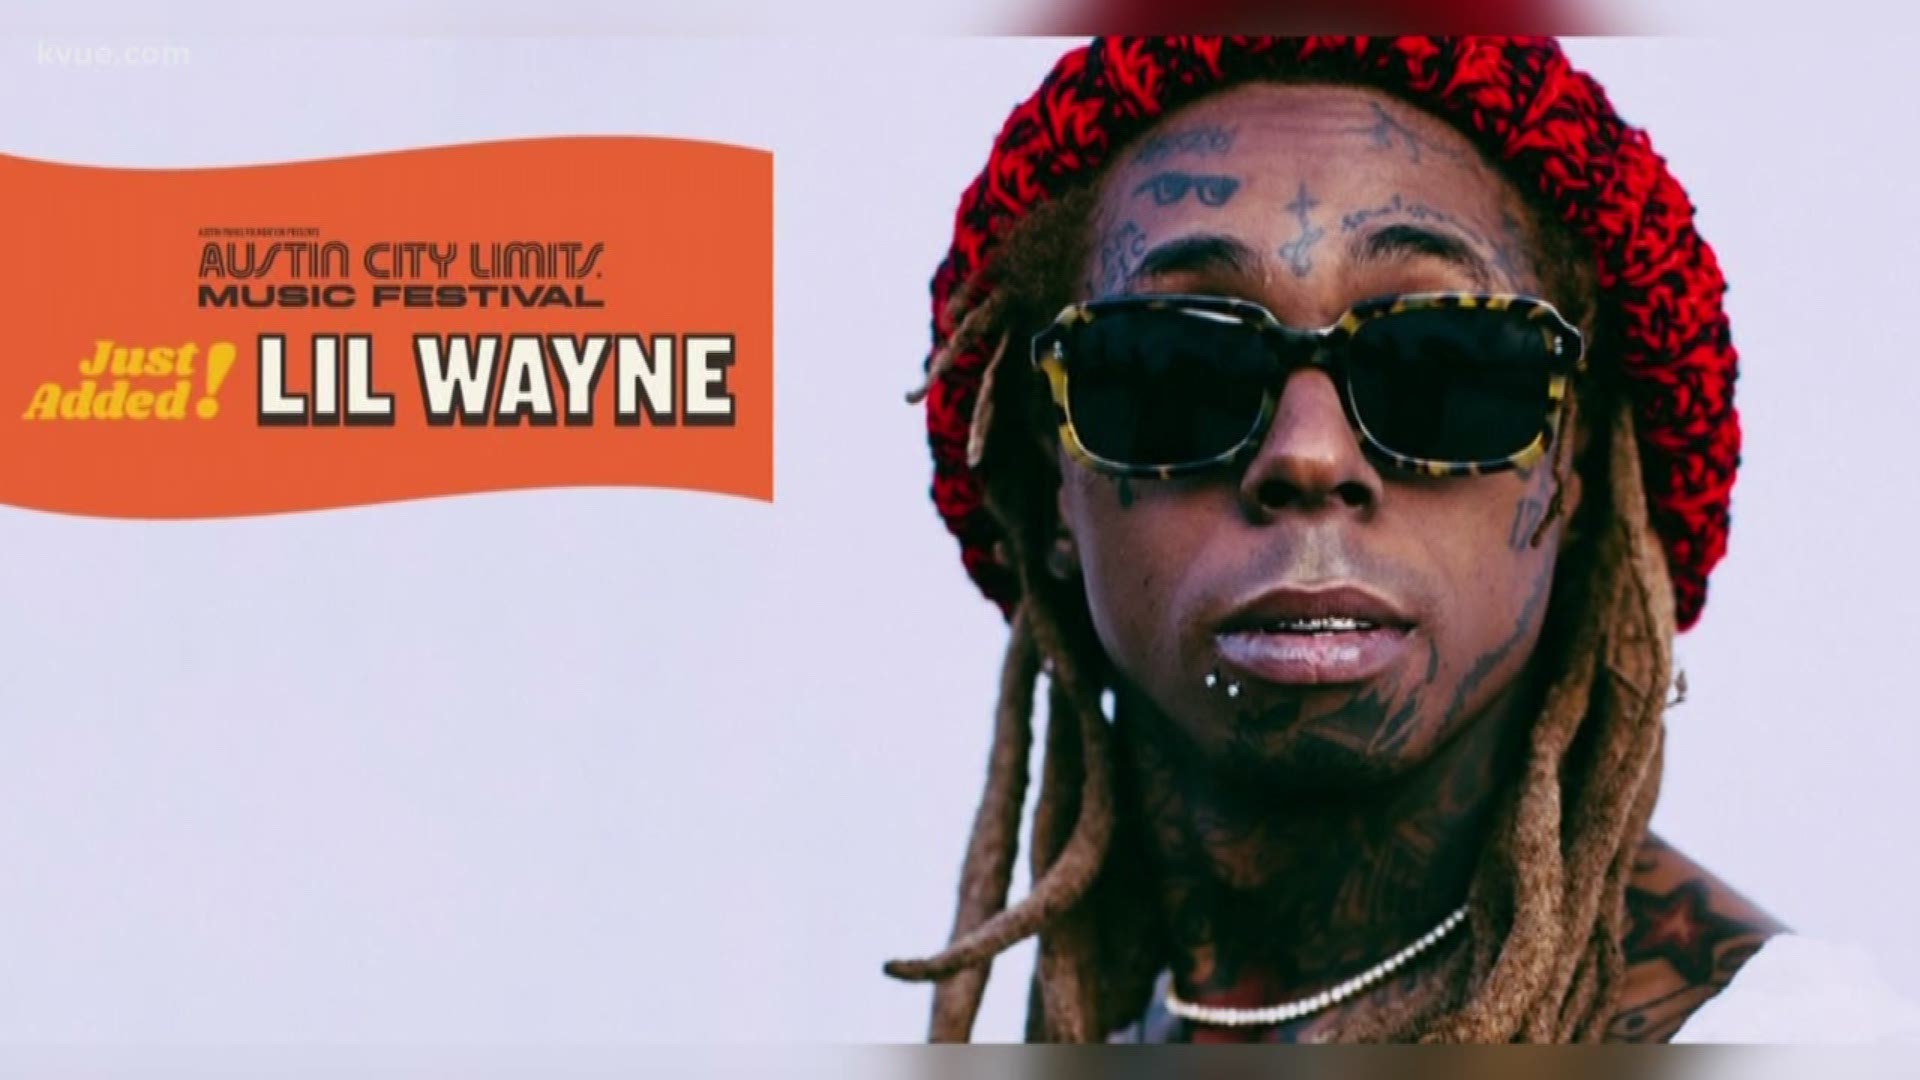 Some more artists have been added to the lineup for the Austin City Limits Music Fest. The band "Phoenix" will play on the first Sunday of the two-weekend festival. Rapper "Lil Wayne" will be performing on the second Saturday. This comes after one of the 